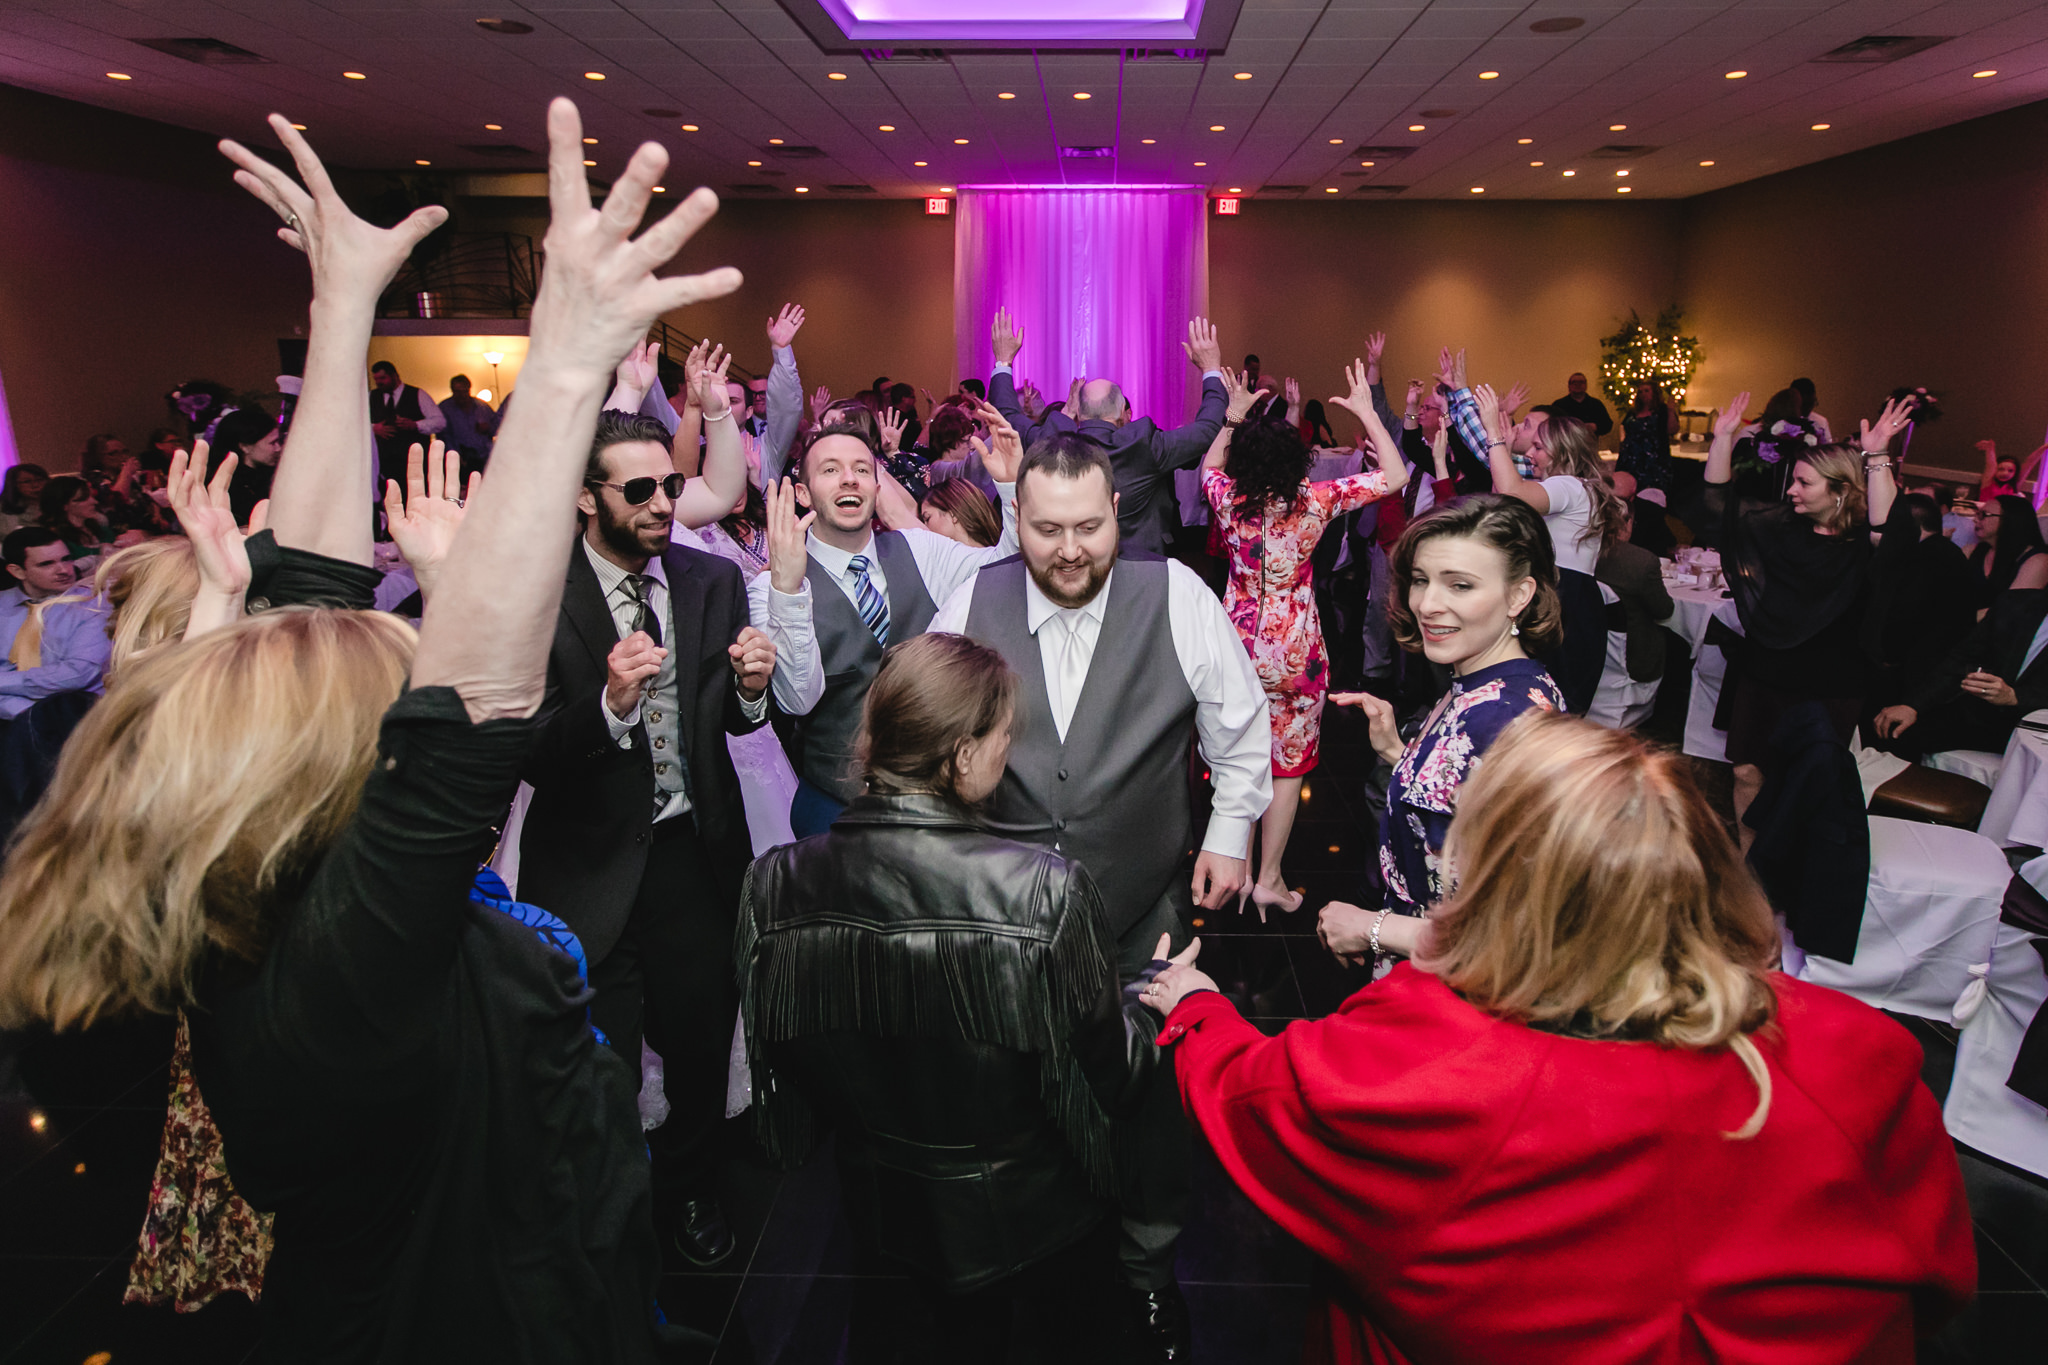 Packed dance floor at a Fez wedding reception